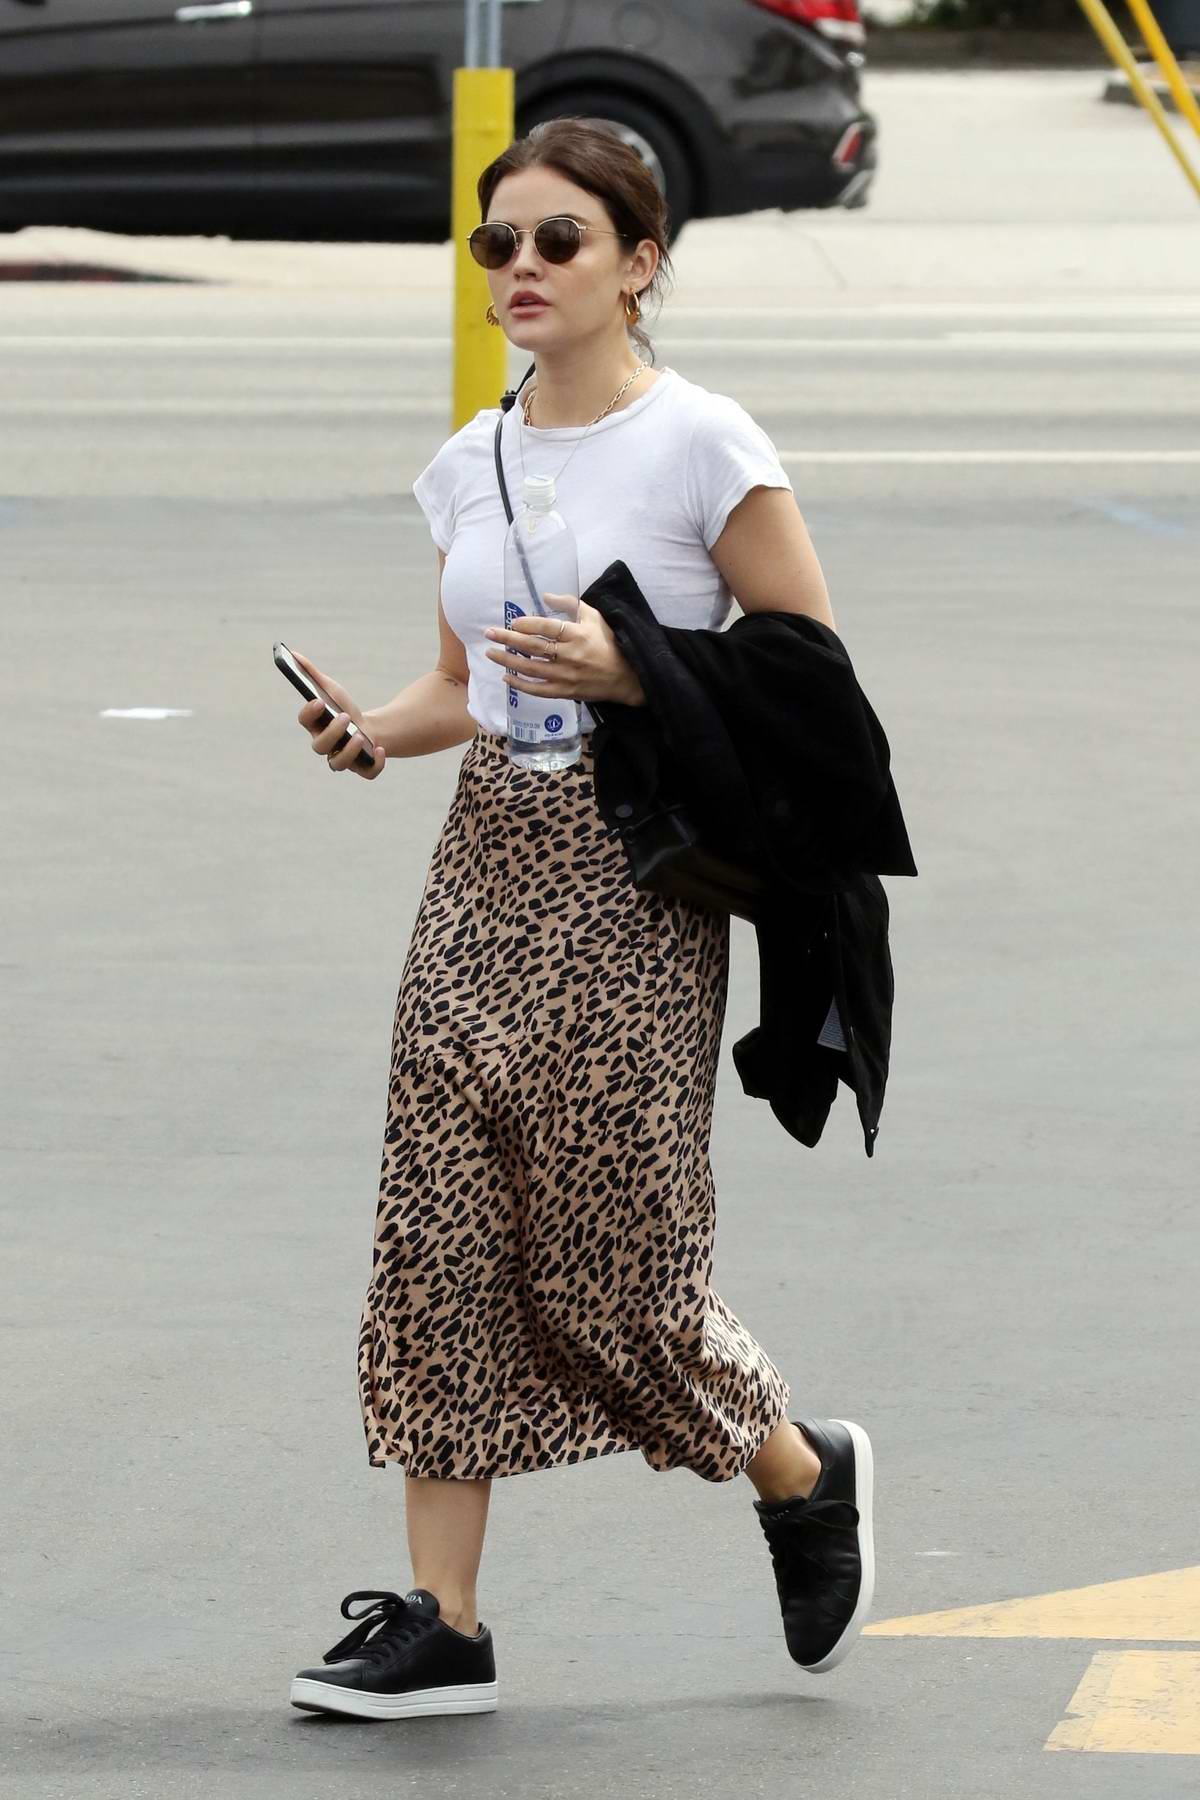 Zendaya Coleman looks tired as she arrives at Heathrow airport to fly out  of London